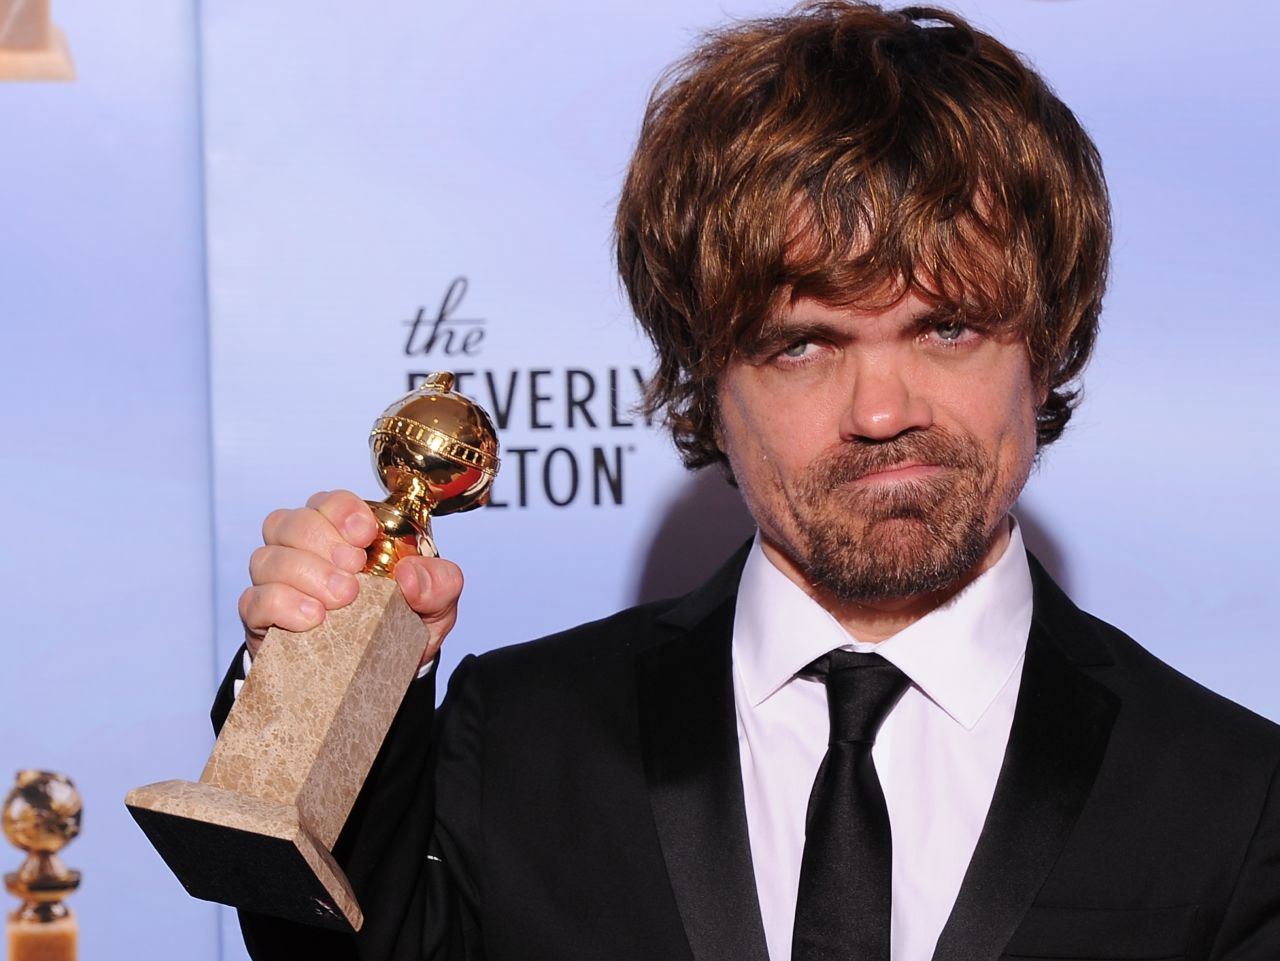 Peter Dinklage is NOT a midget. He is a dwarf. There's a difference. That said, midget rentals actually exist. But you're probably getting dwarfs. Either way, it's incredibly offensive.